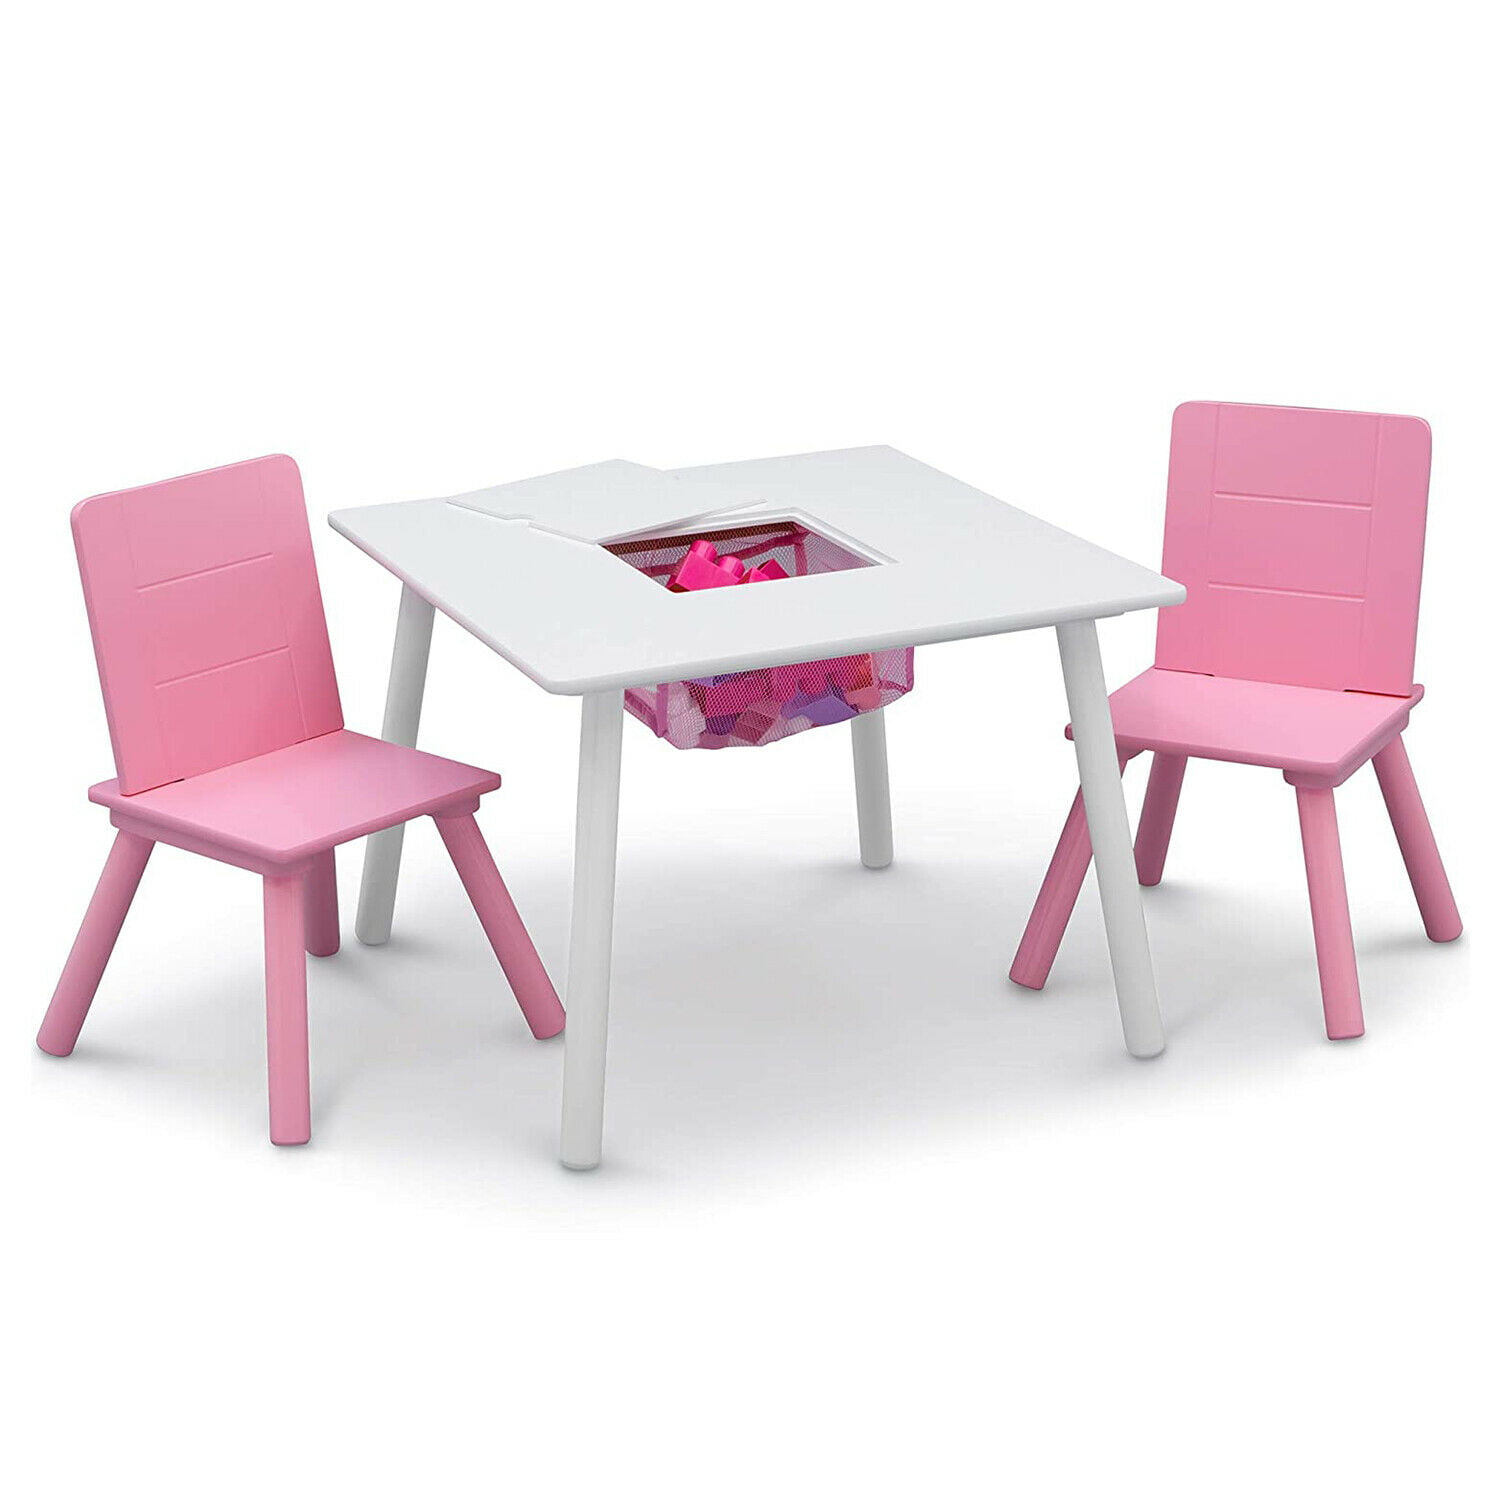 Delta Children Kids Table And Chair Set With Storage For Toddlers